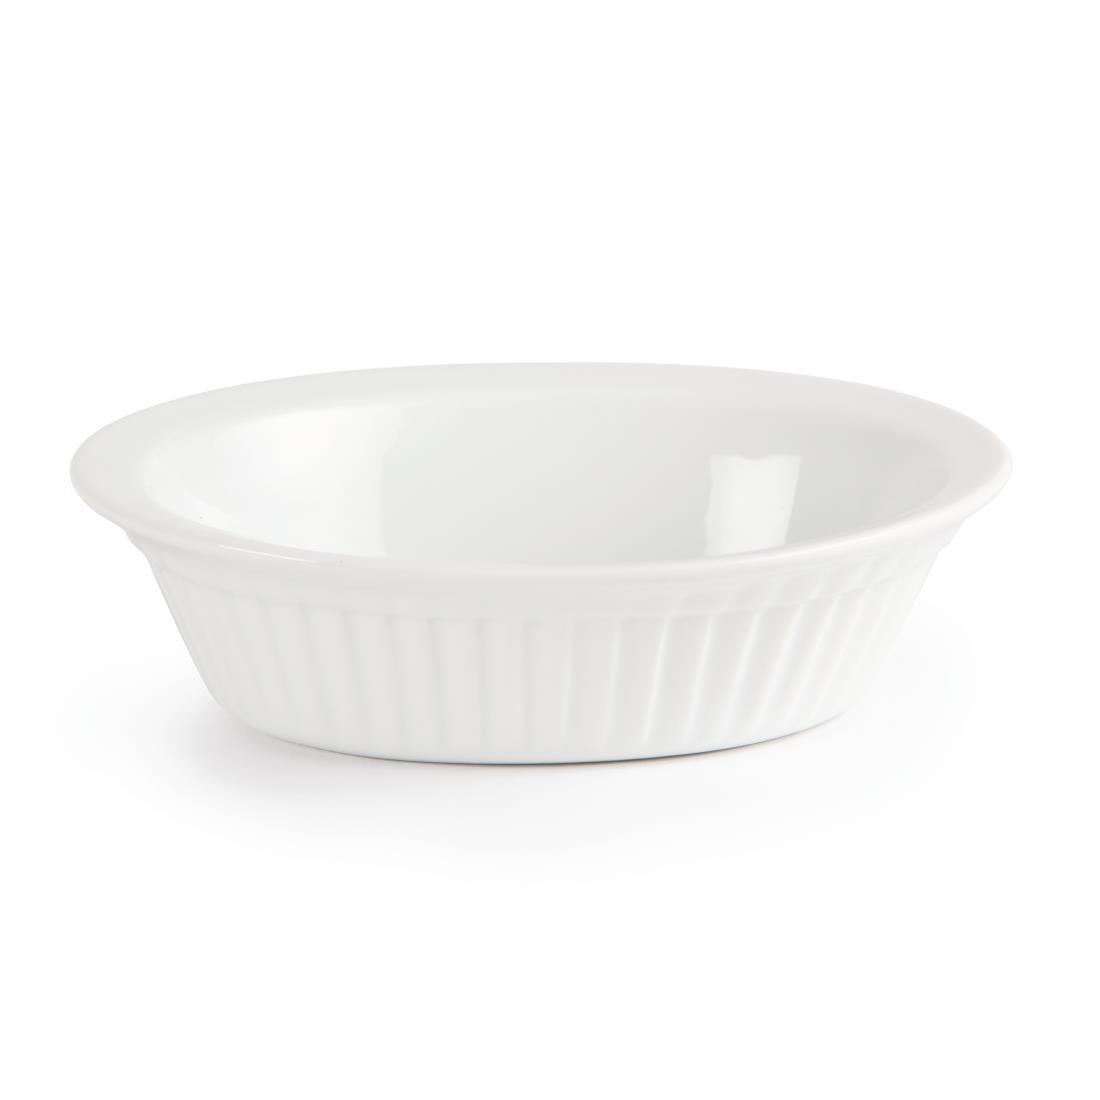 Olympia Whiteware Oval Pie Dishes 170mm (Pack of 6) - C110  - 3